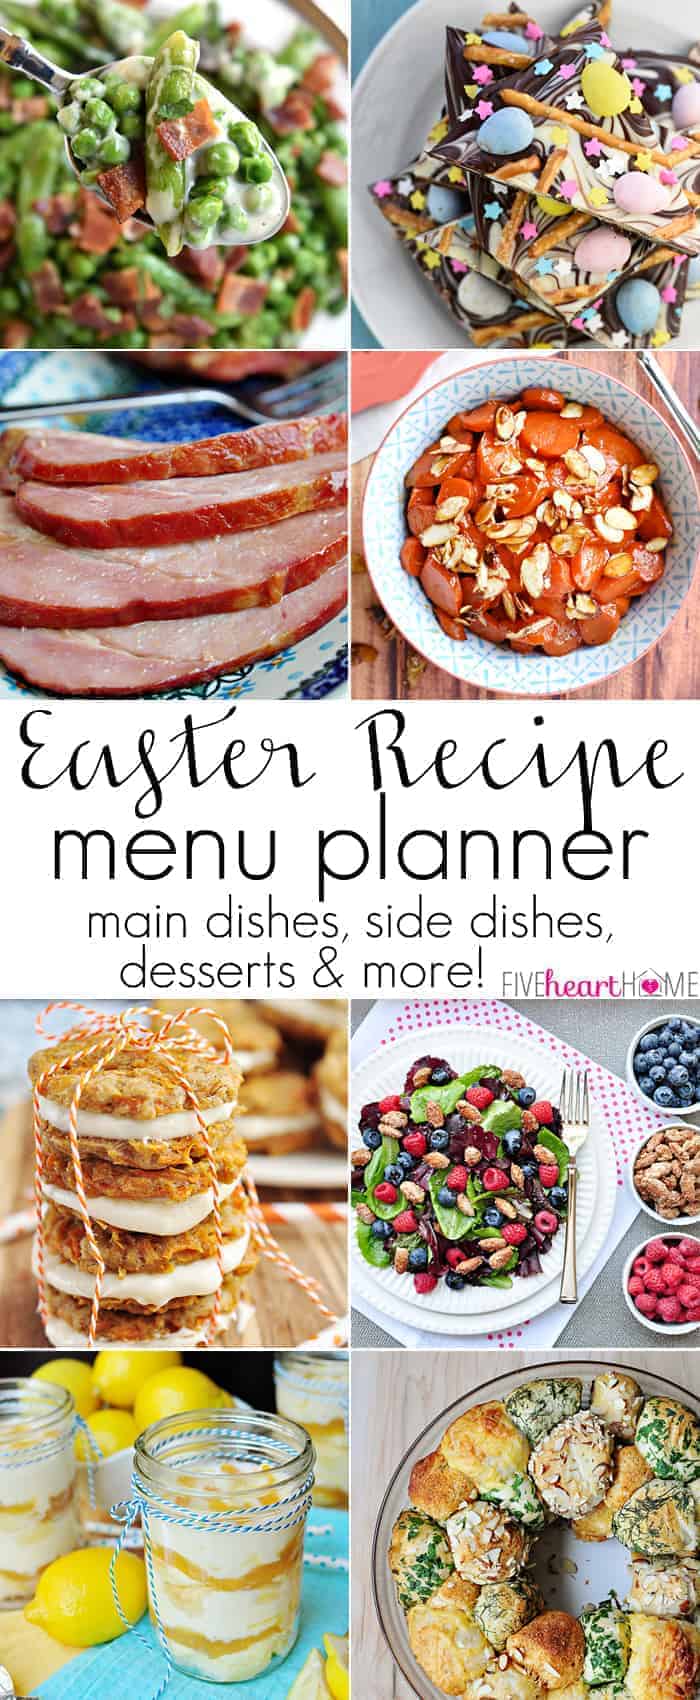 The Ultimate Easter Recipe Menu Planner ~ main dishes, side dishes, desserts, recipes to use up leftover ham and hard-boiled eggs, and MORE! | FiveHeartHome.com